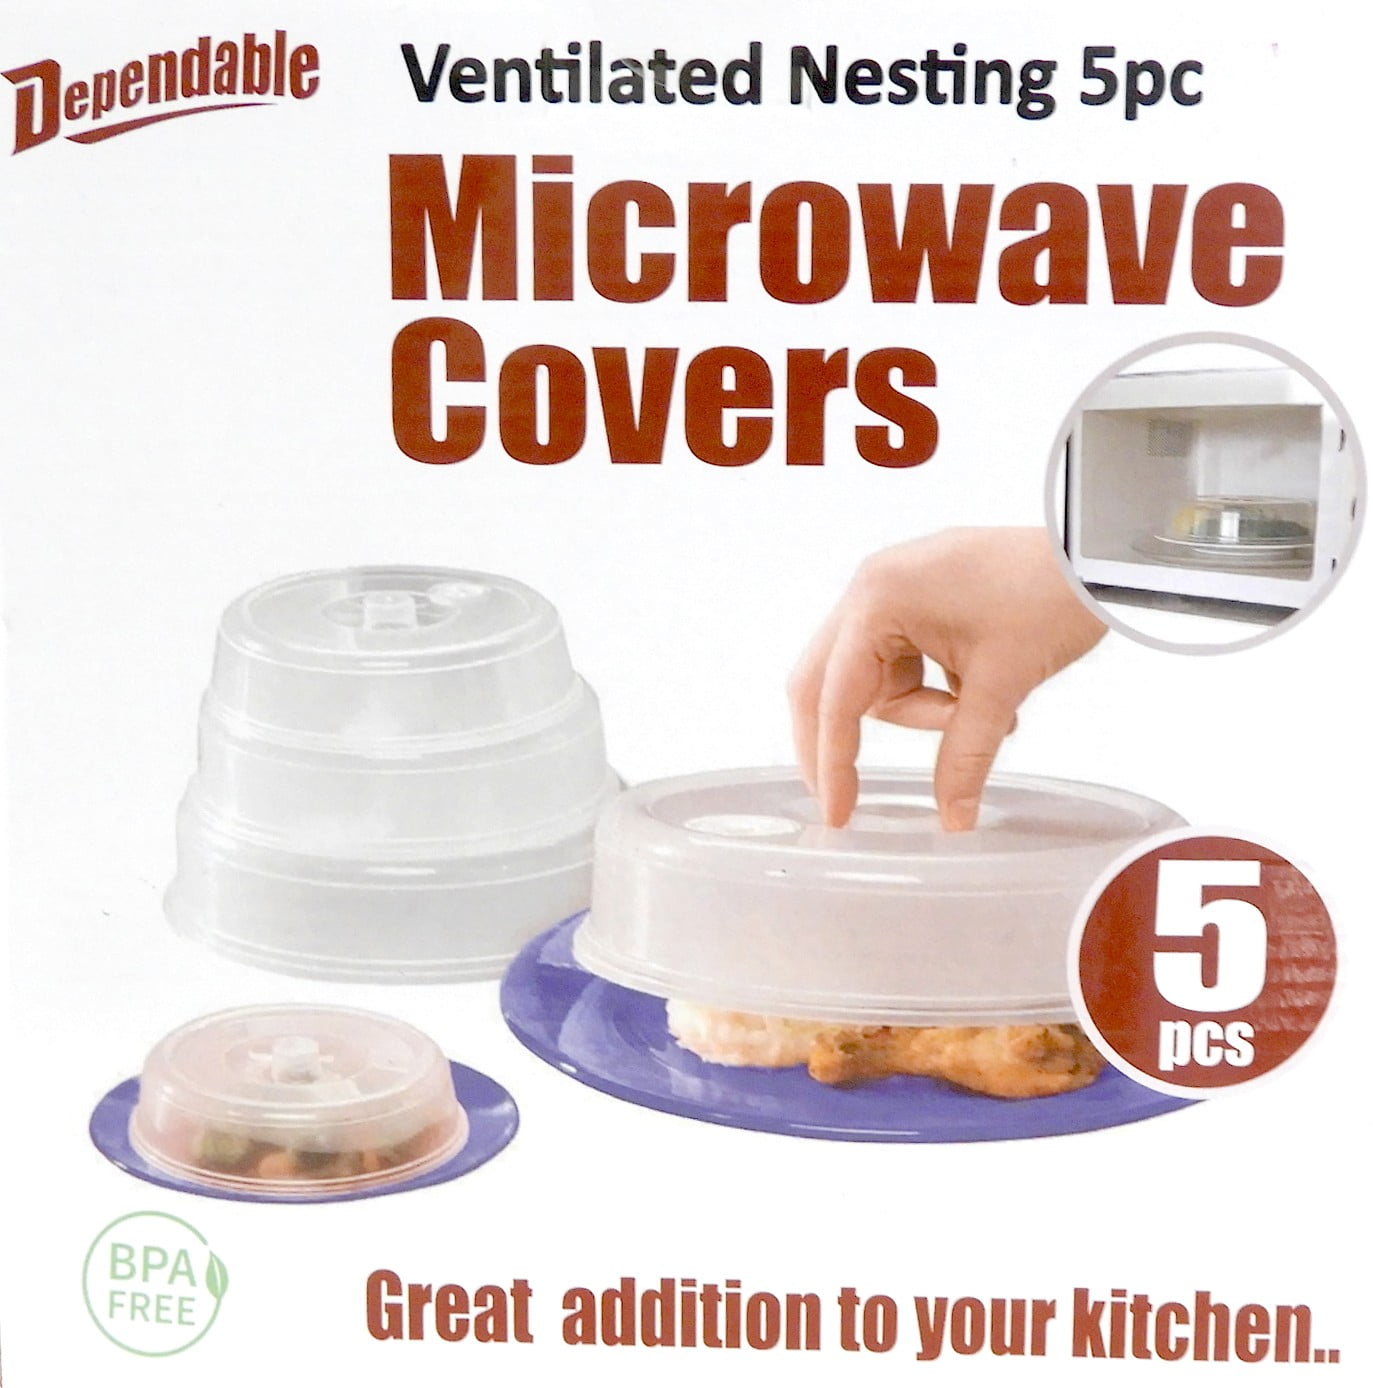 5 Piece Ventilated Microwave Covers Adjustable Steam Vents